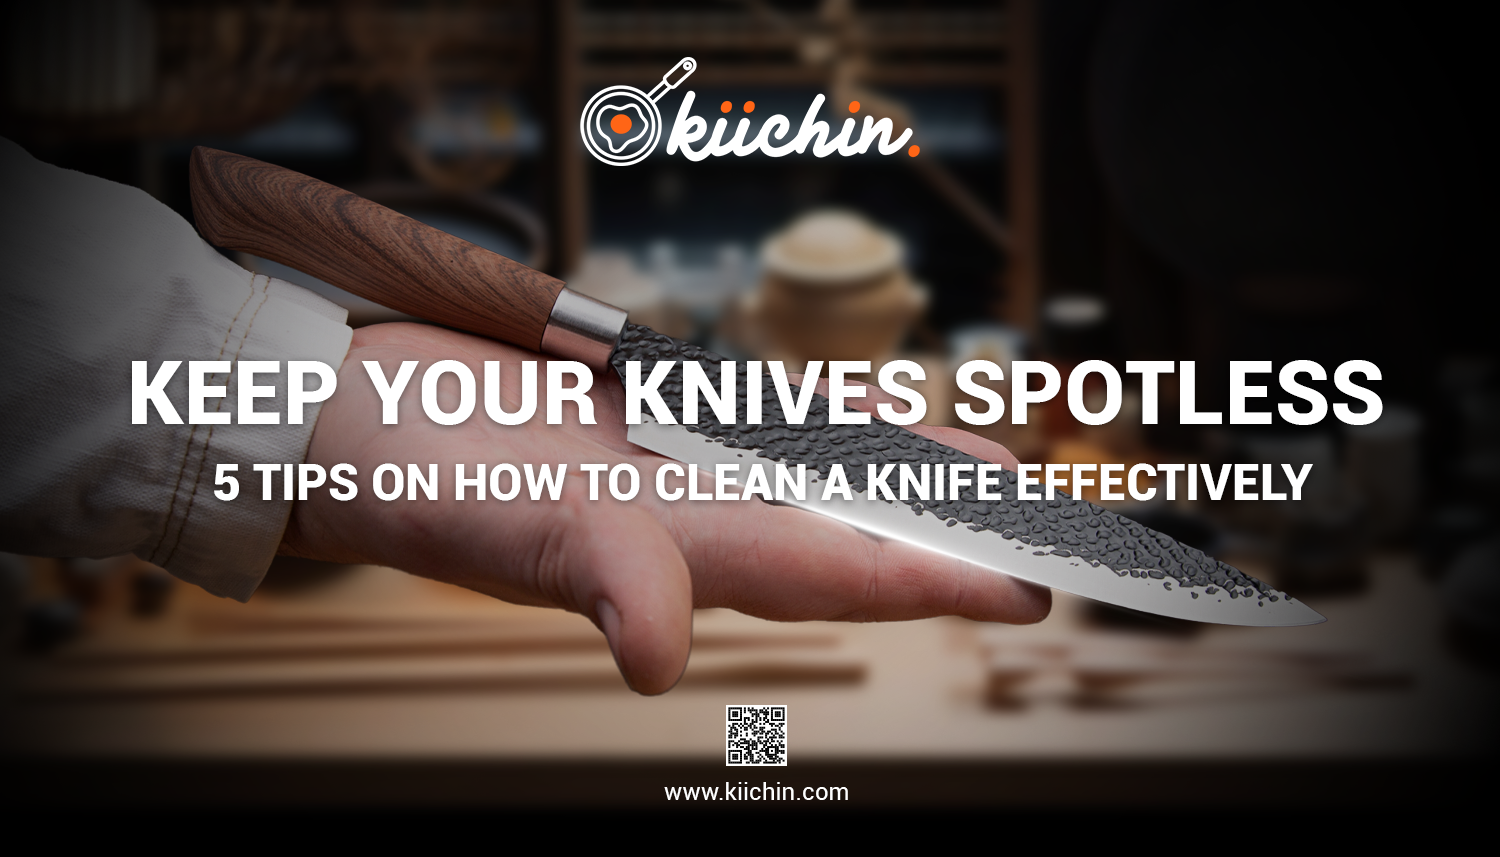 Keep Your Knives Spotless: 5 Tips on How to clean a knife effectively